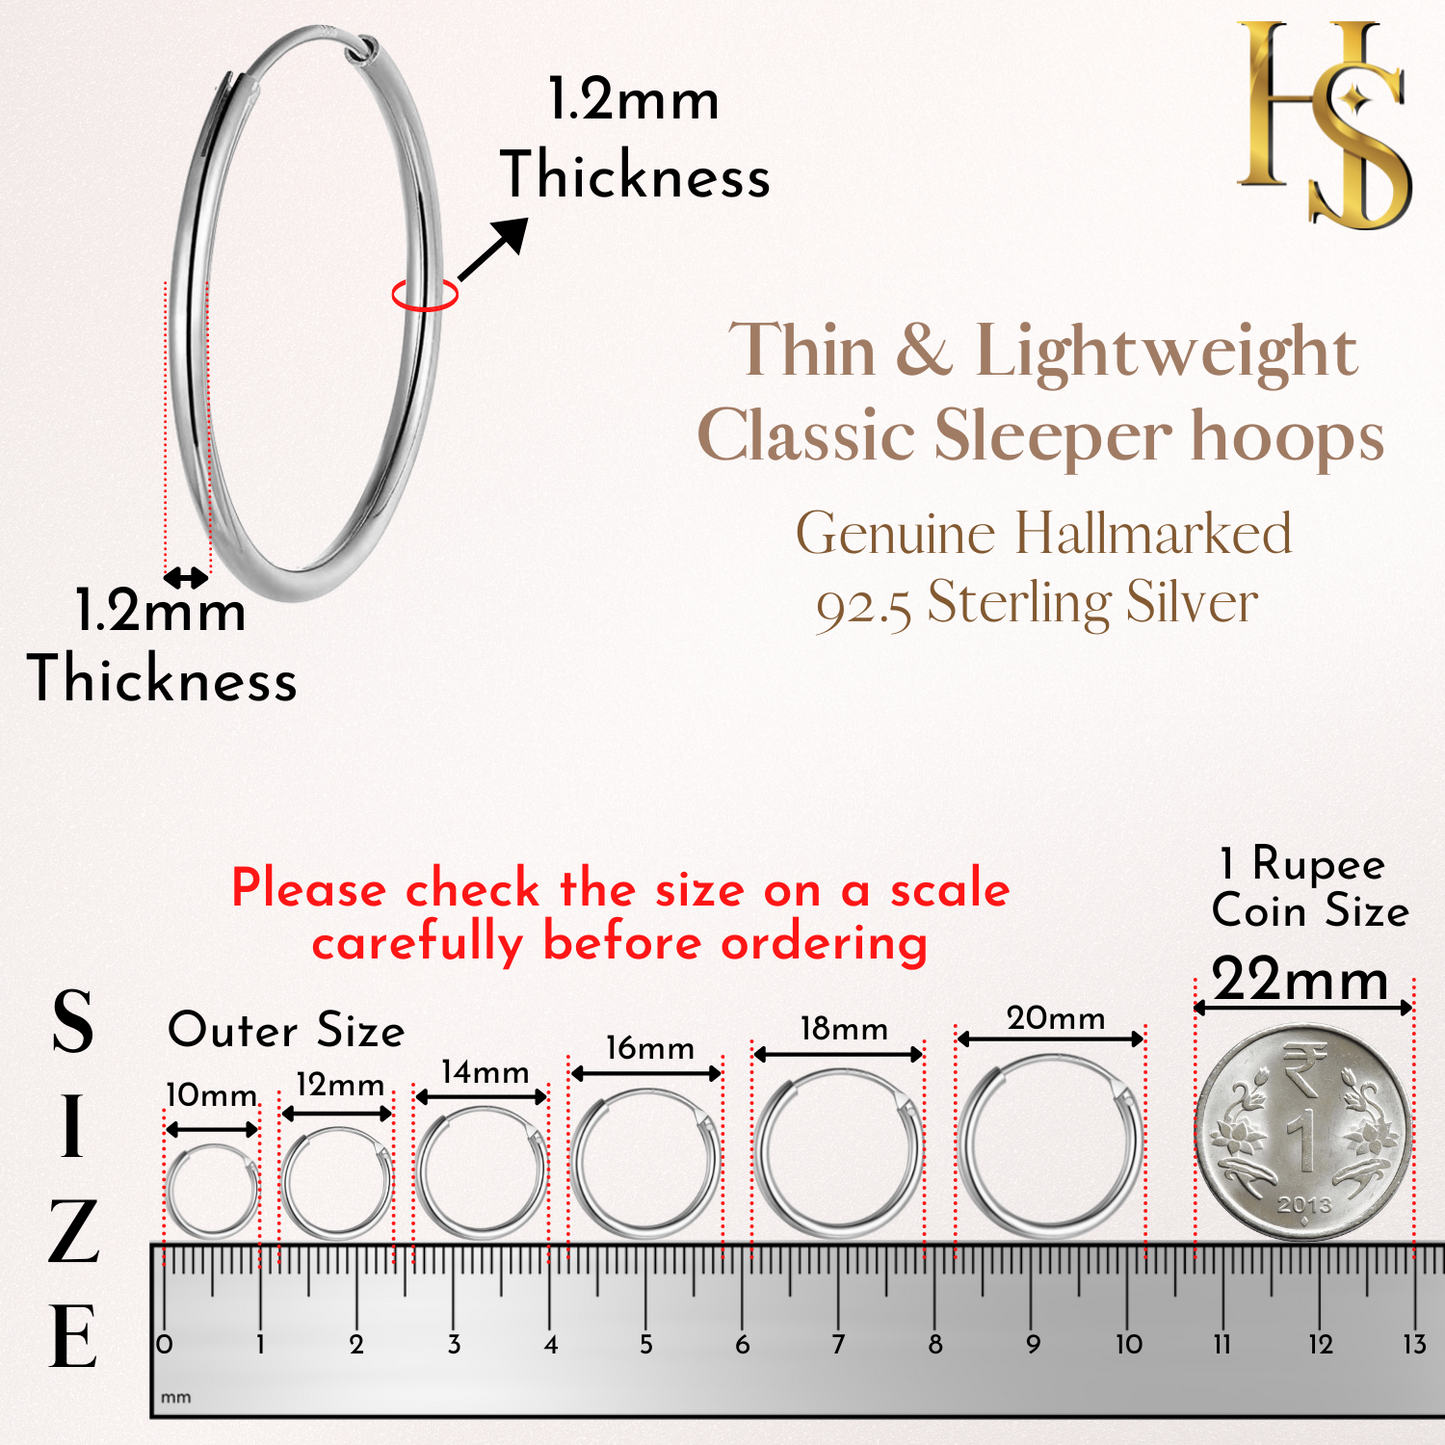 Mens Classic Hoop Earrings in 92.5 Sterling Silver - 1.2mm Thickness - Small Sizes 10mm to 20mm (Thin & lightweight Hoops)